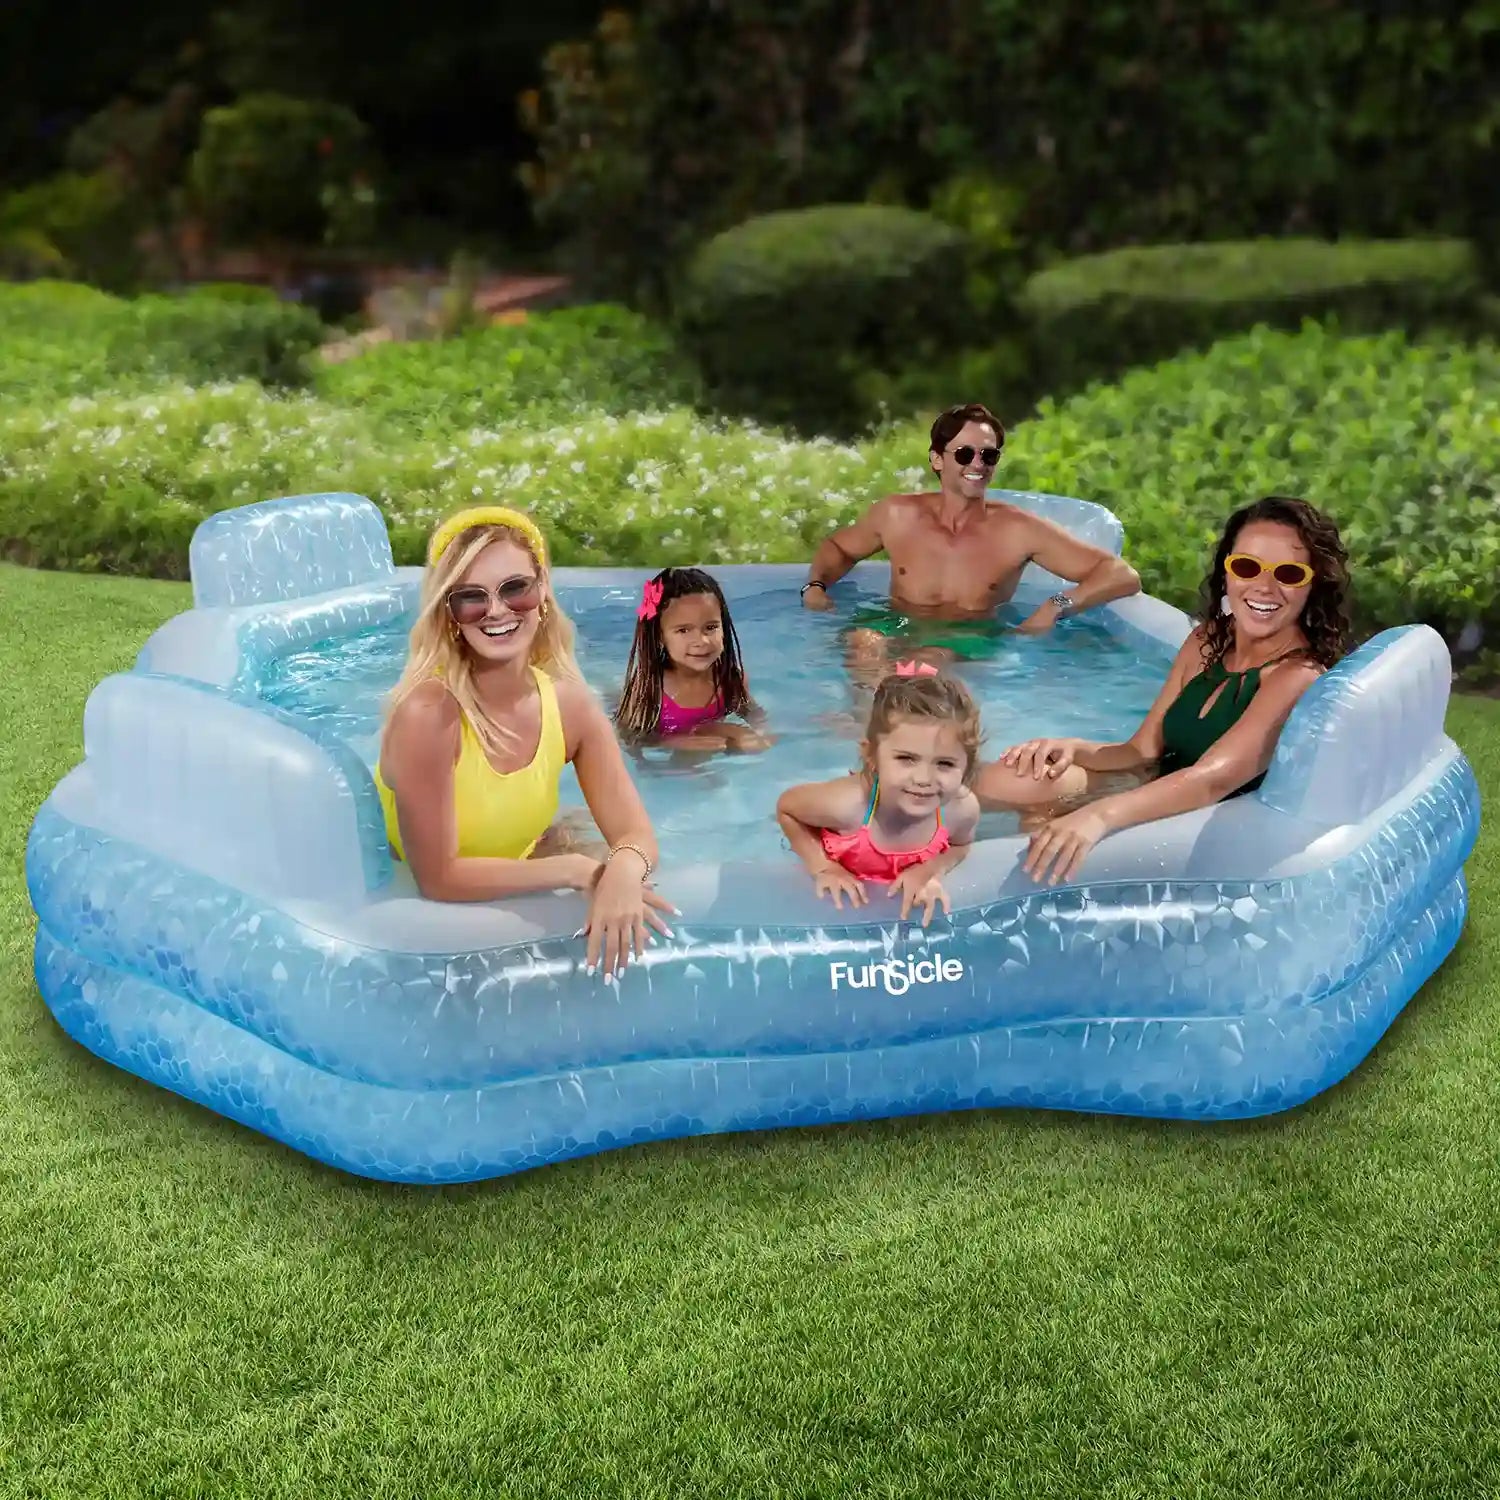 Funsicle Great Escape Pool with people on a grass background